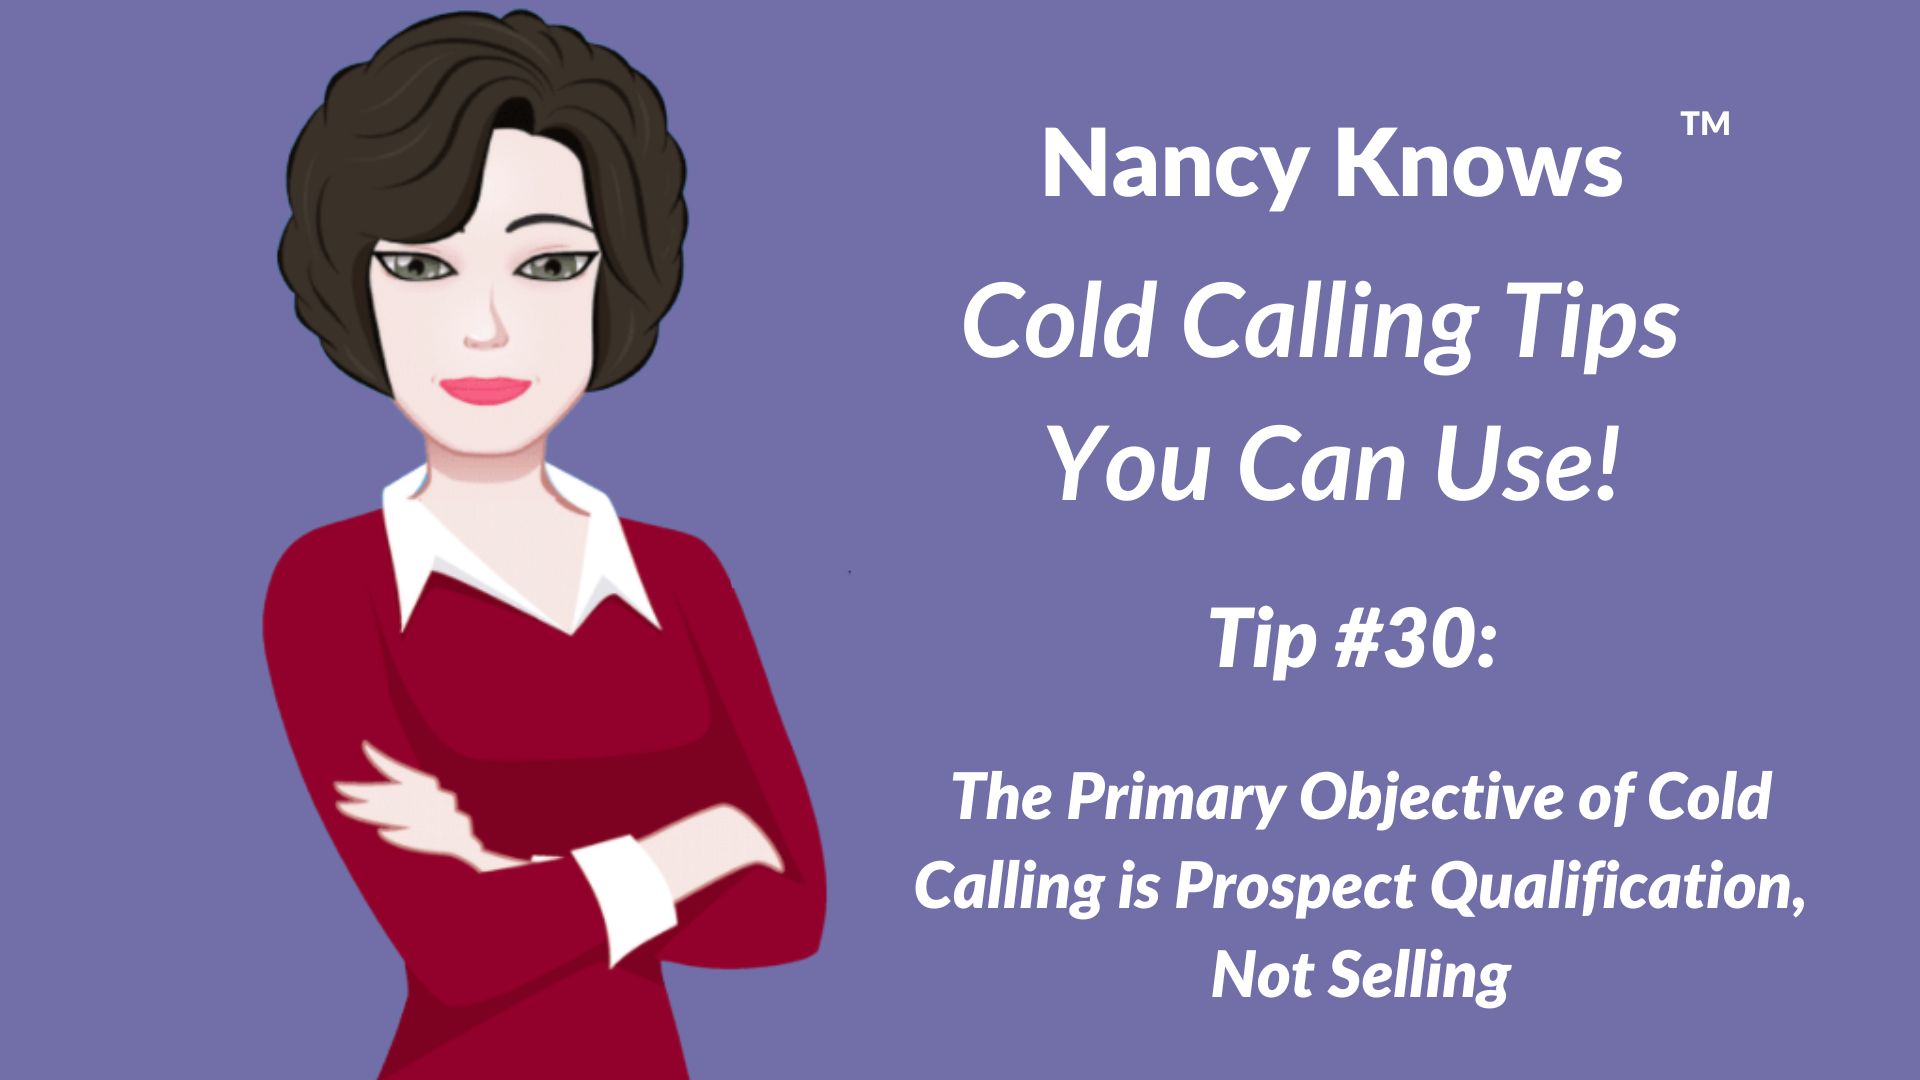 Nancy Knows #30: The Primary Objective of Cold Calling is Prospect Qualification, Not Selling